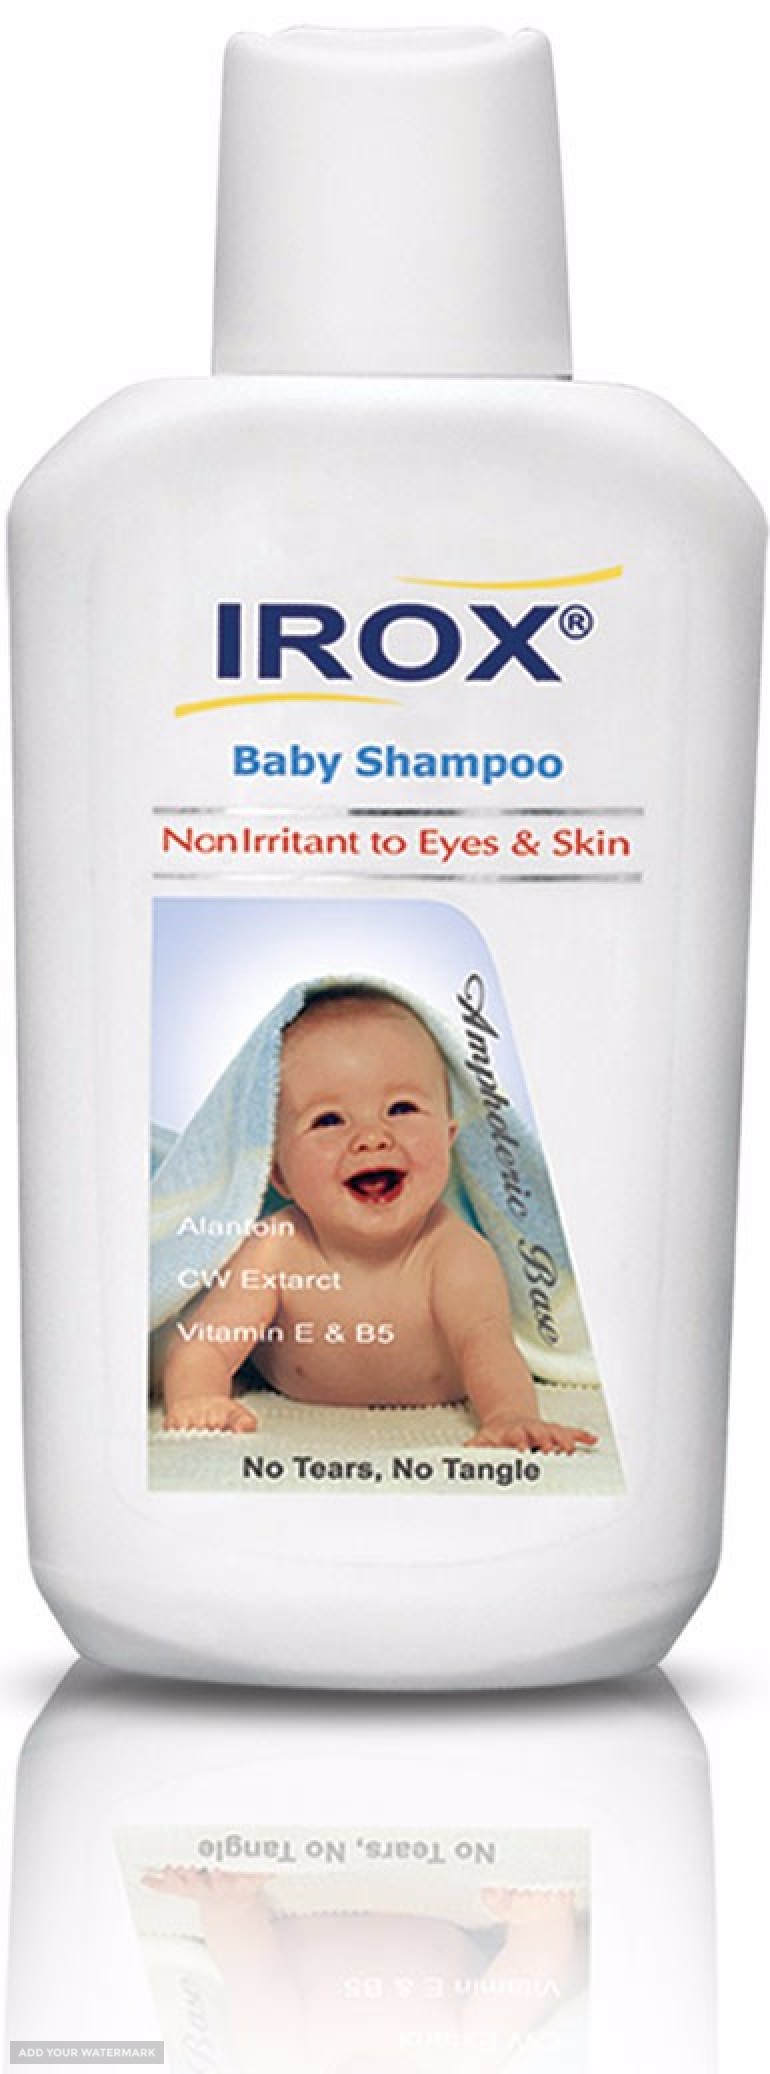 baby shampoo for export